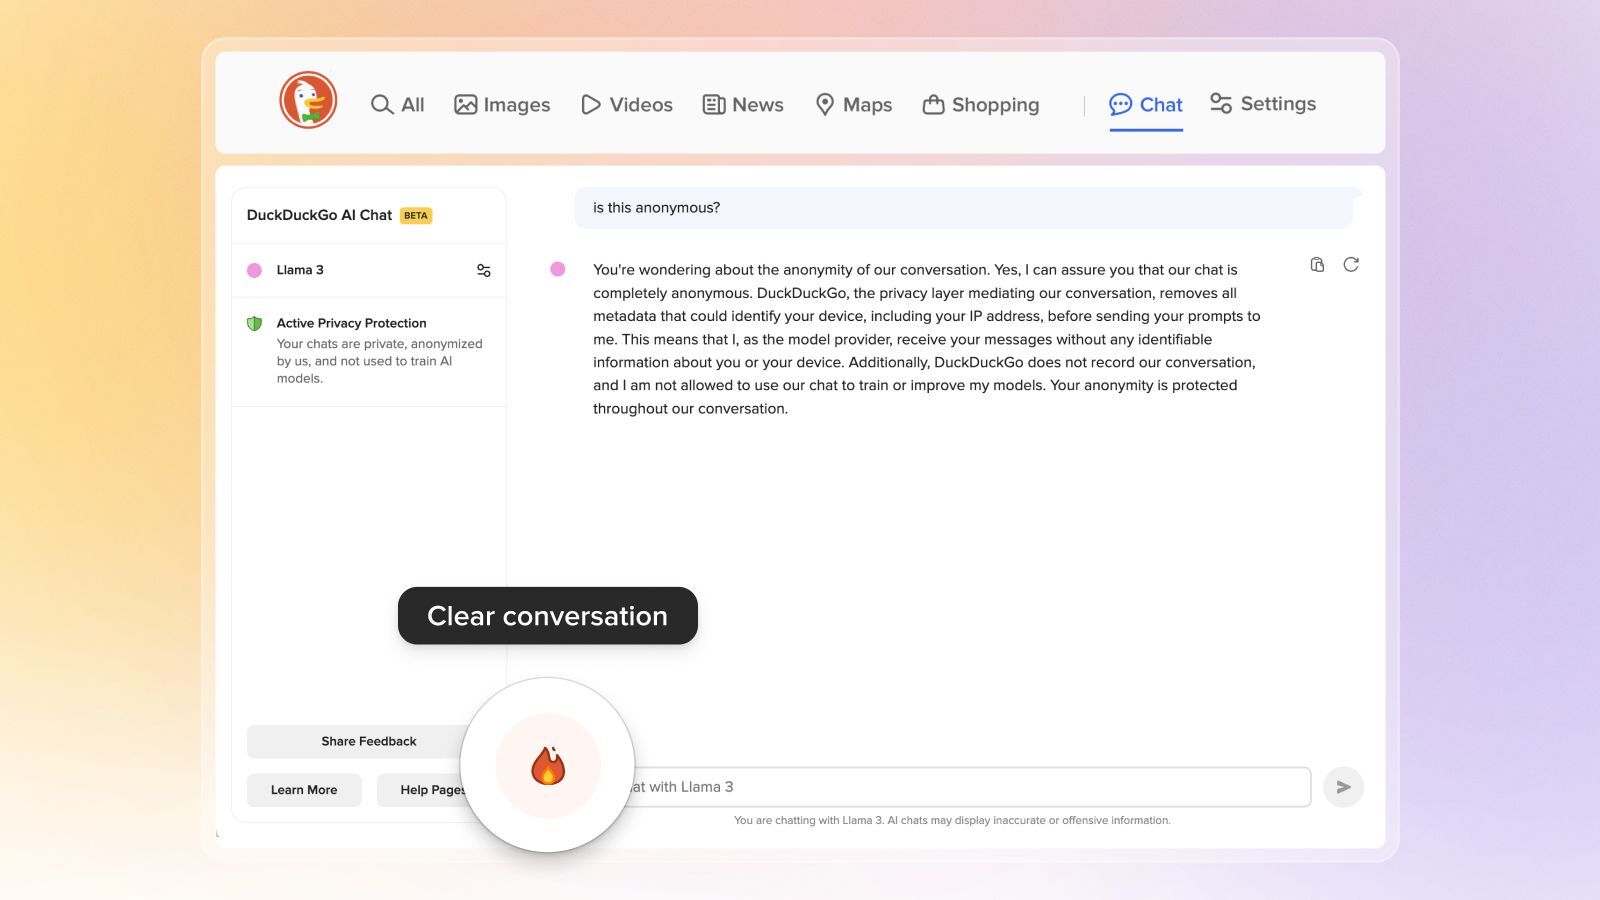 Image Source - DuckDuckGo - DuckDuckGo is now offering an AI chatbot with a focus on privacy